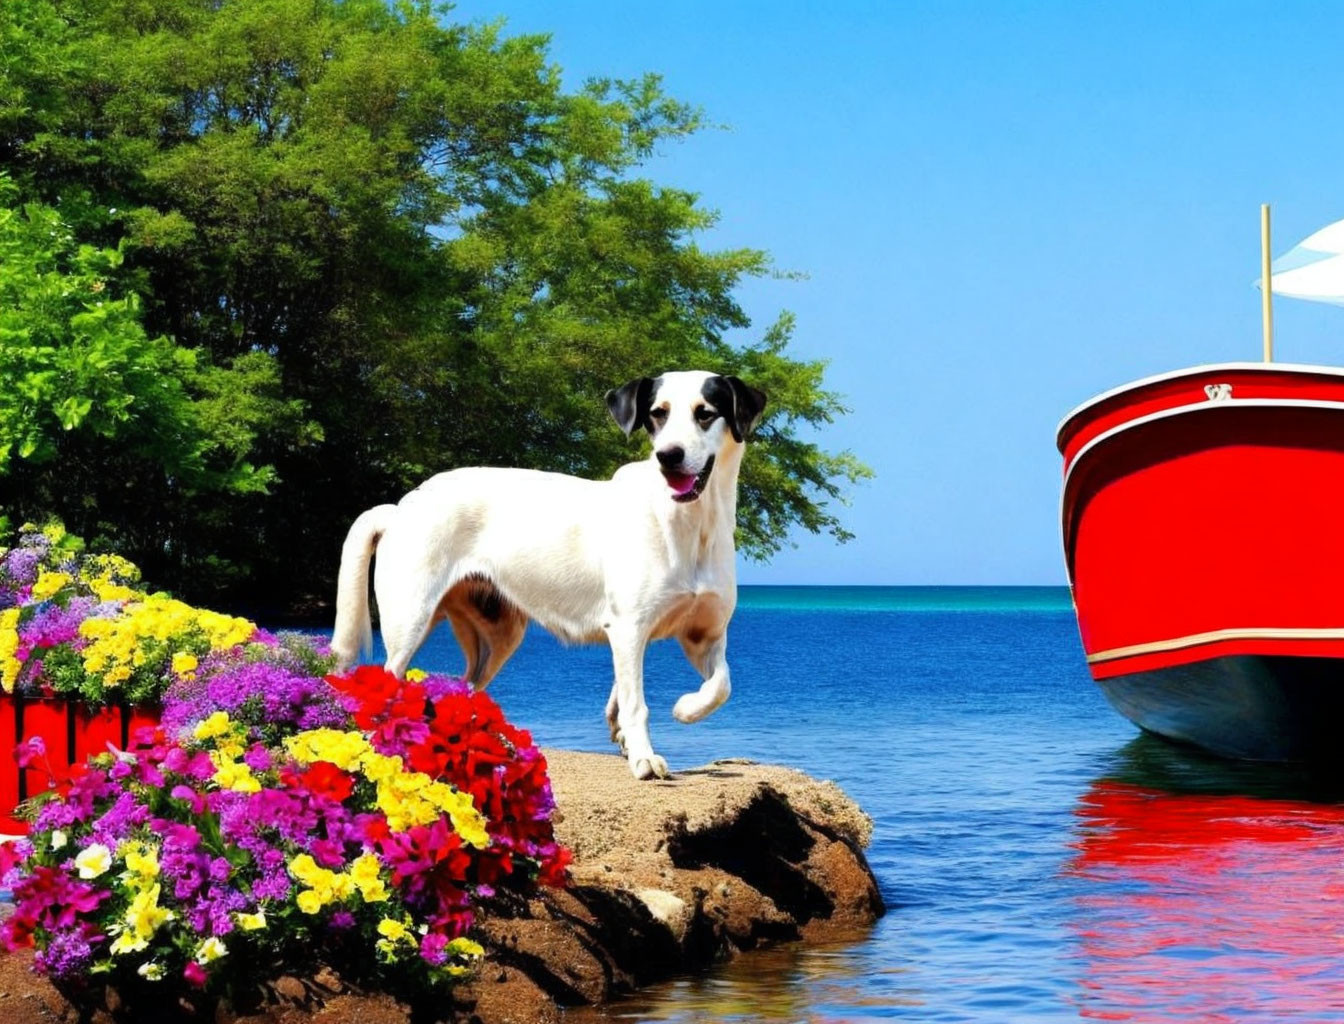 White dog with black patches on rocky shoreline with colorful flowers, red boat, and clear blue sky